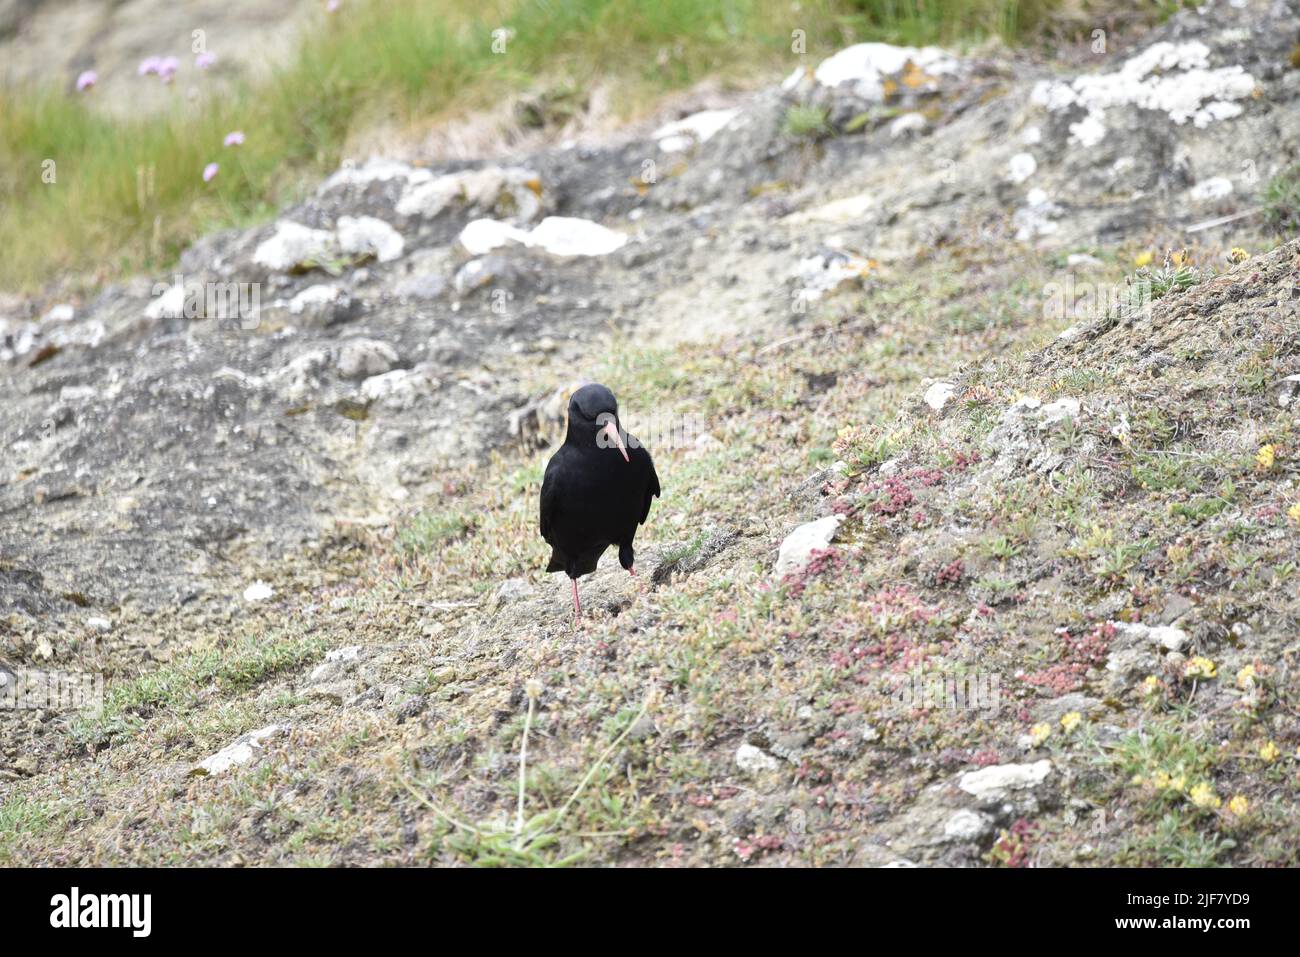 Close-Up Facing Image of a Red-Billed Chough (Pyrrhocorax pyrrhocorax) Standing Middle Foreground on a Rock, with Head Tilted to Ground in June, UK Stock Photo